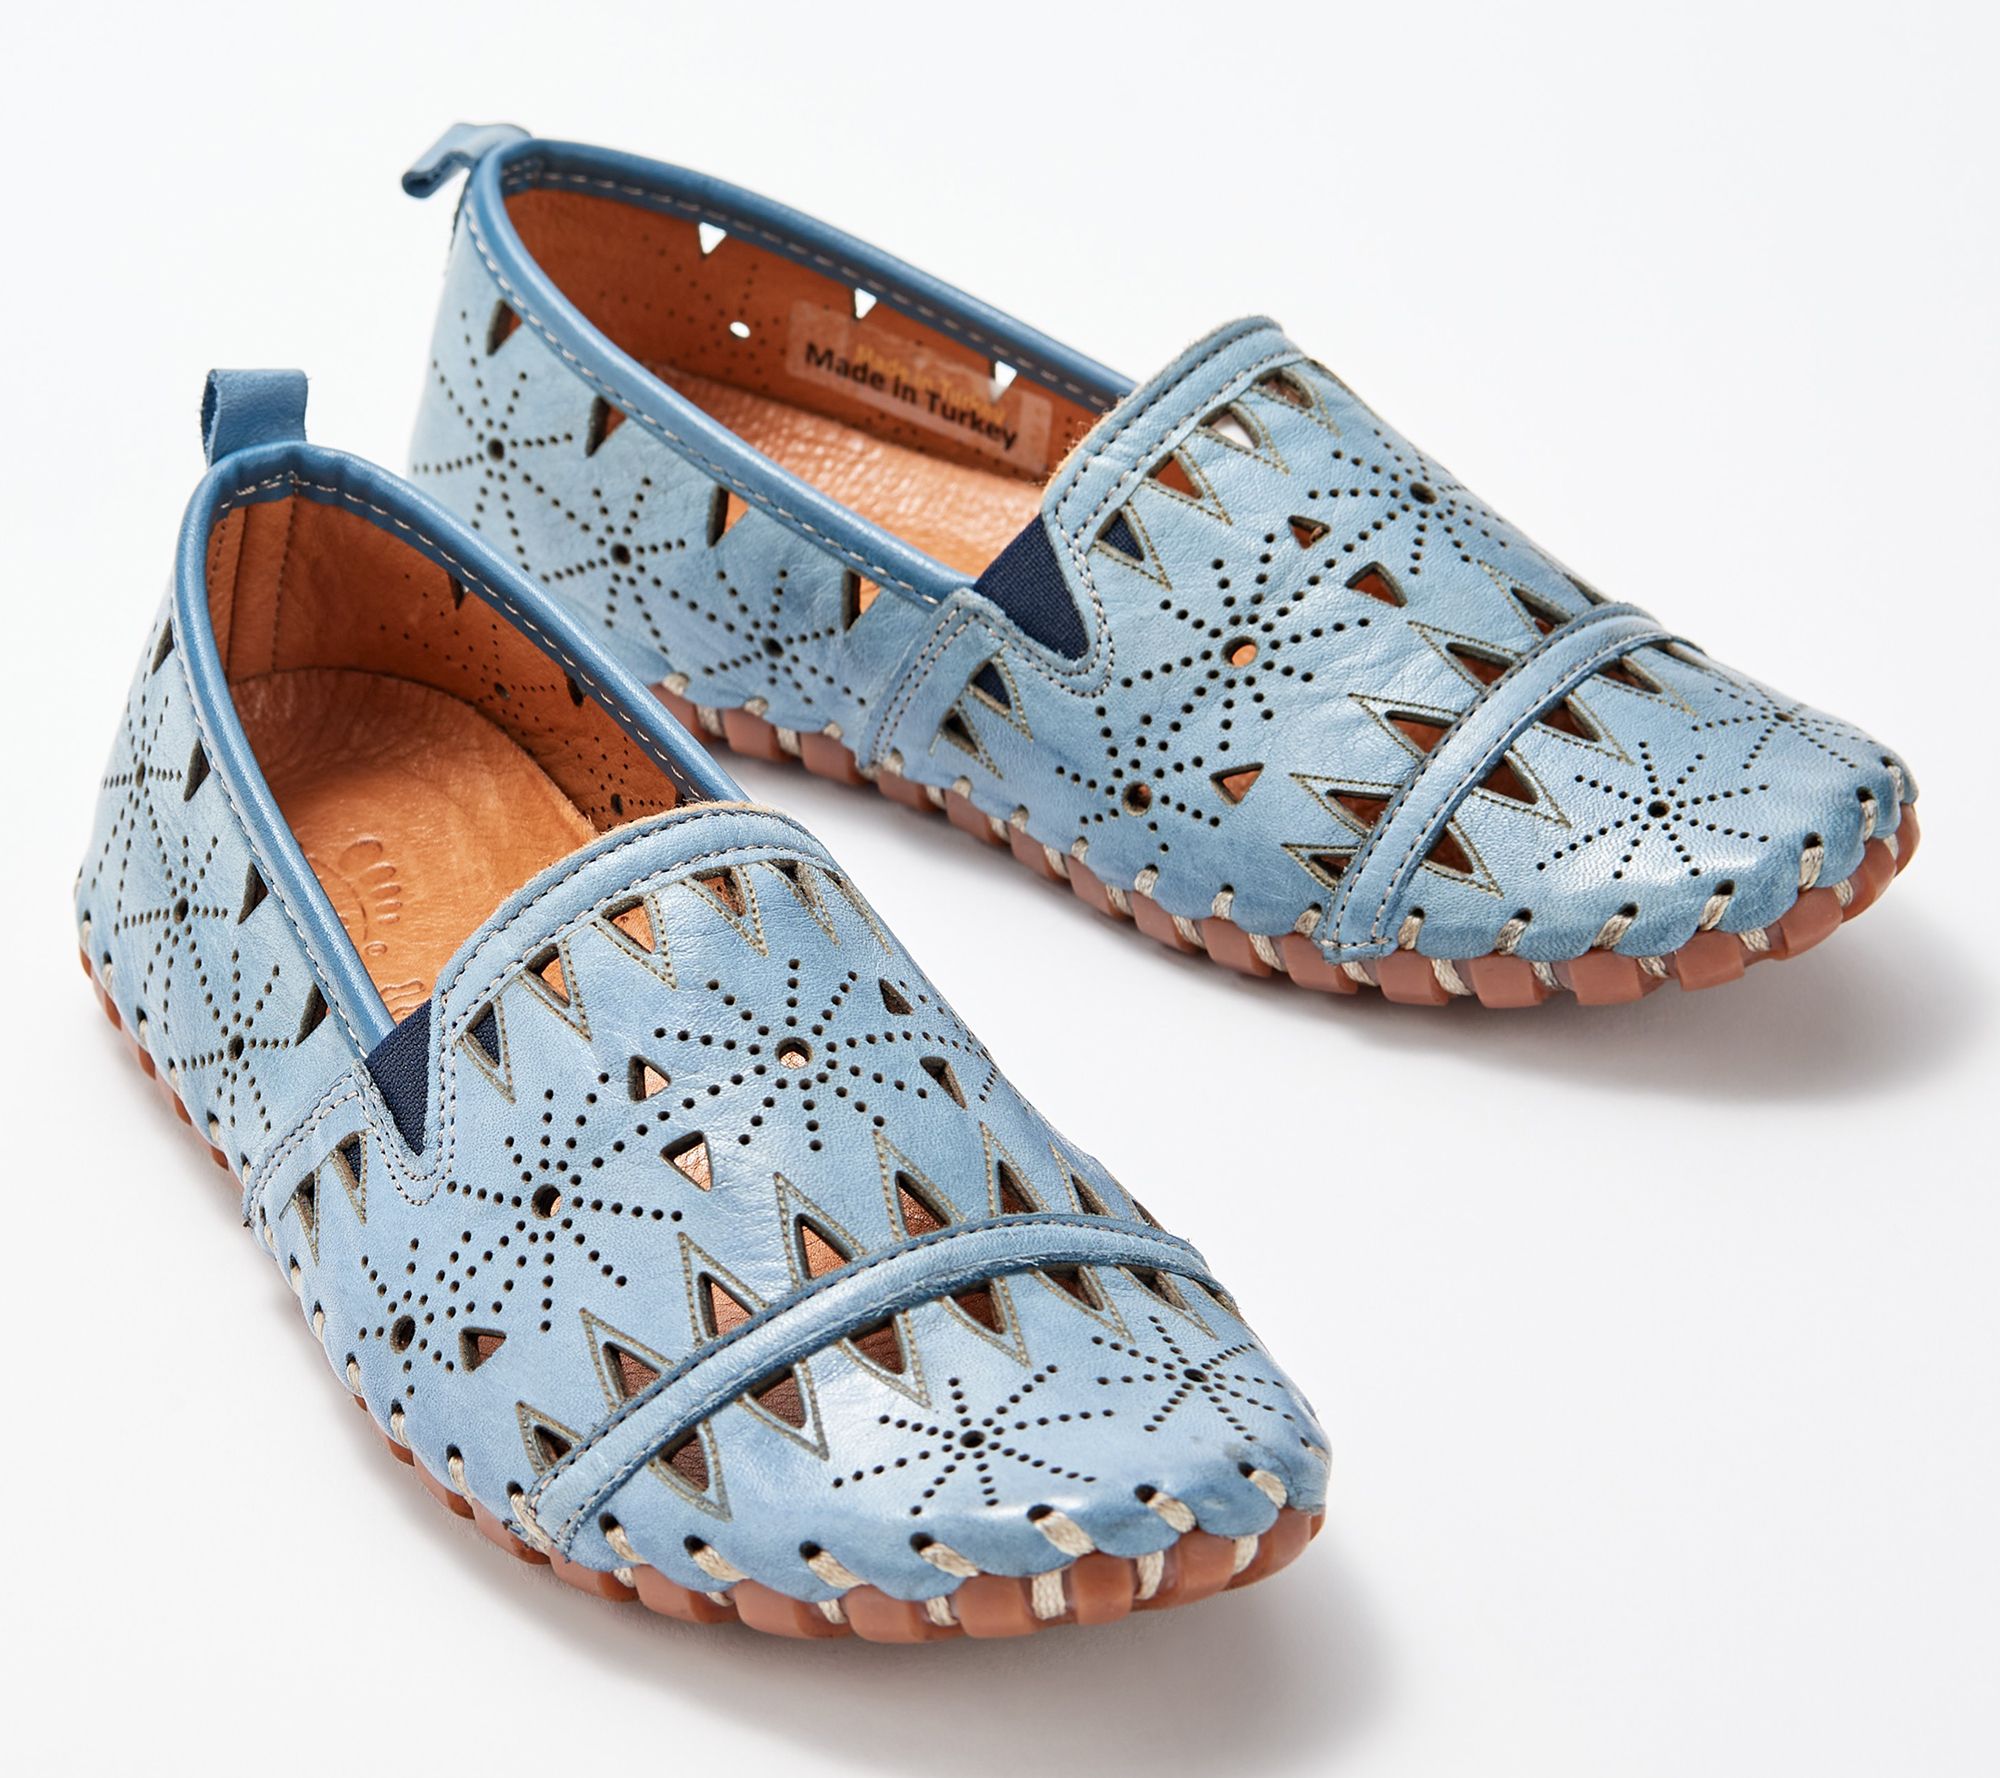 Spring Step Leather Perforated Slip-On Shoes- Fusaro - Qvc.Com